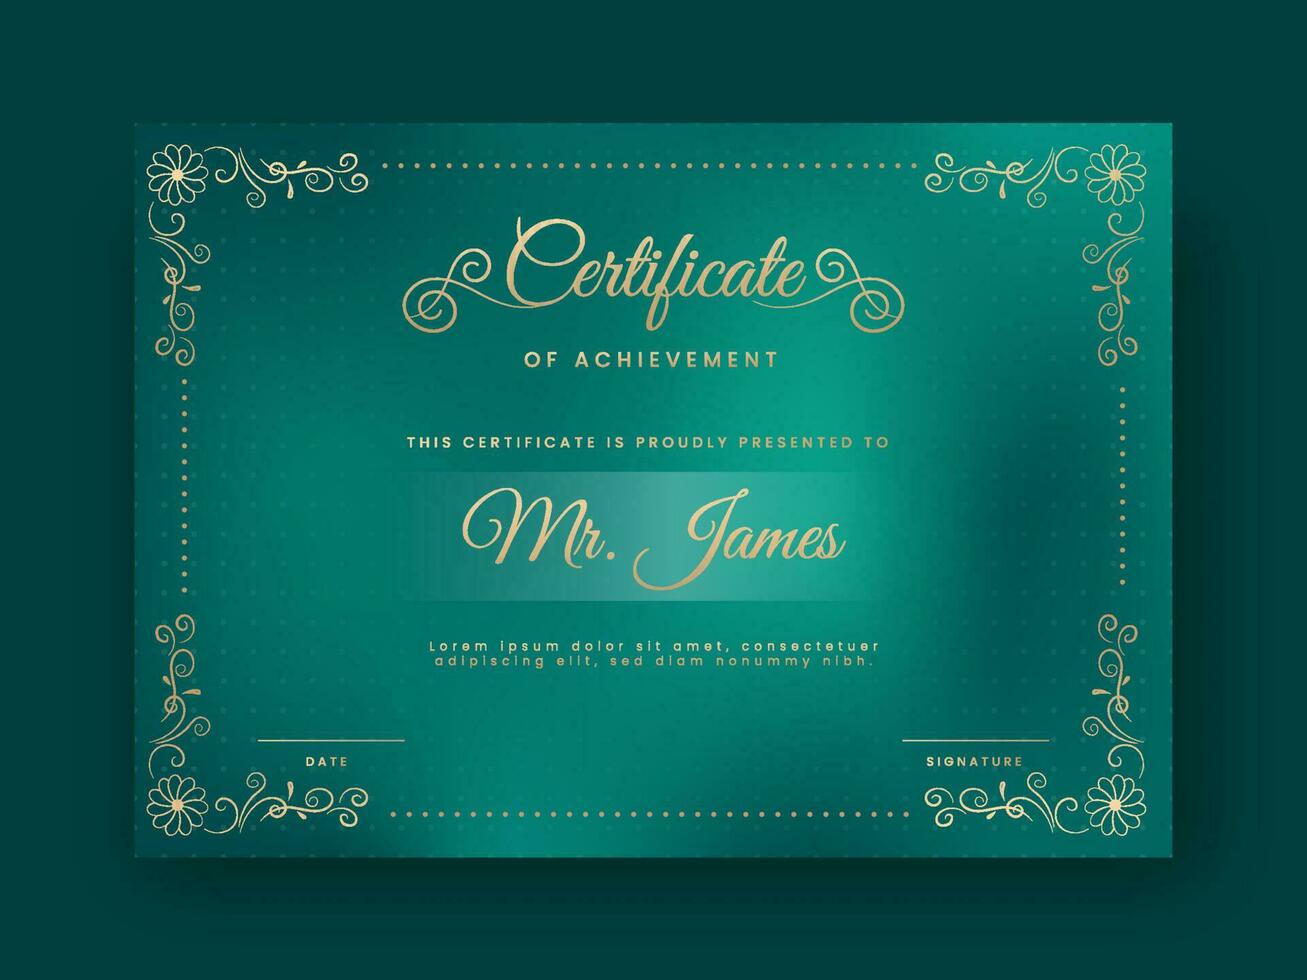 Certificate Of Achievement Template Layout in Golden and Teal Green Color. vector